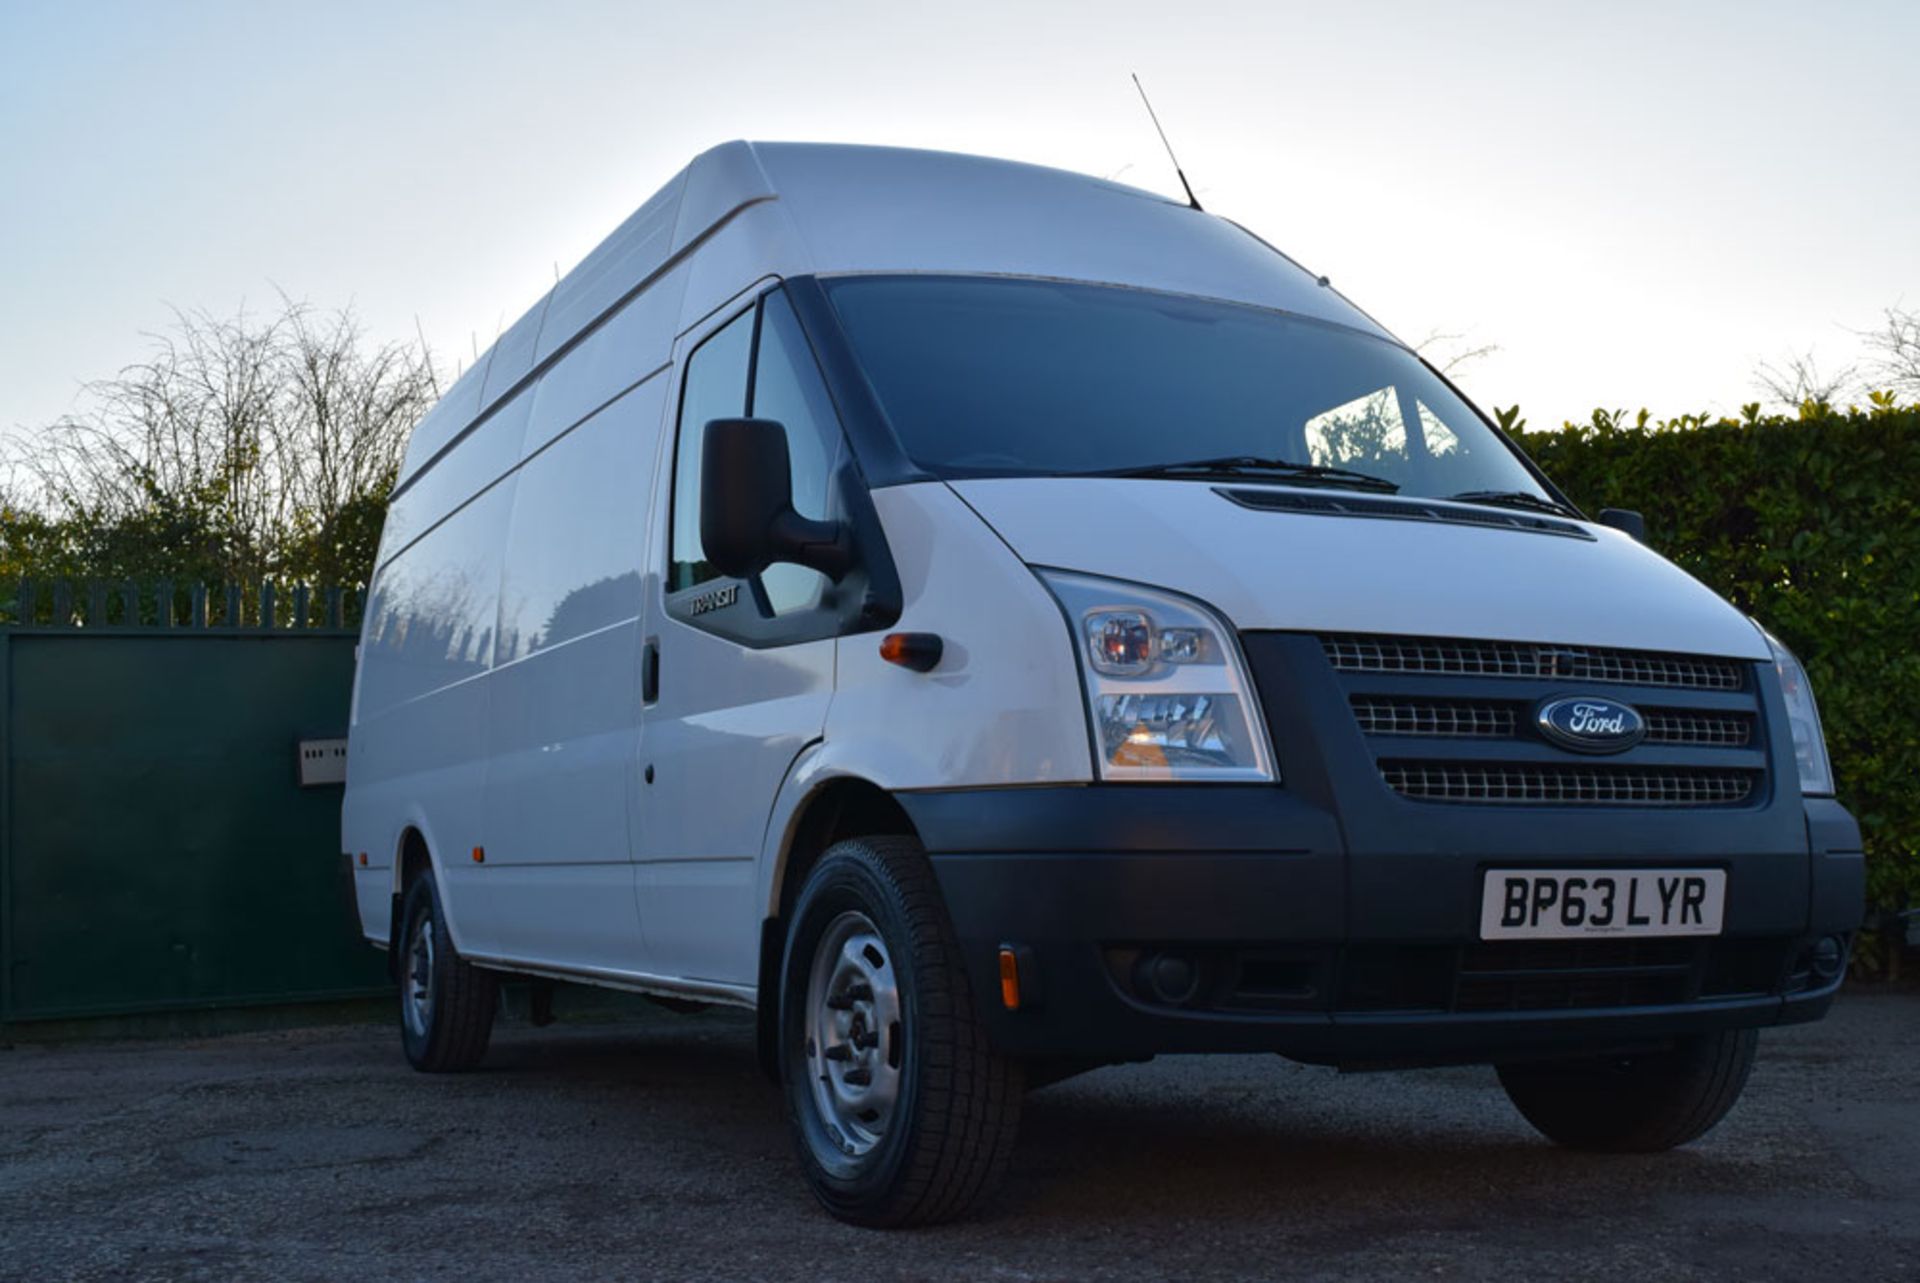 2014 Ford Transit T350 RWD 2.2 125ps LWB High Roof Panel Van - Image 2 of 9